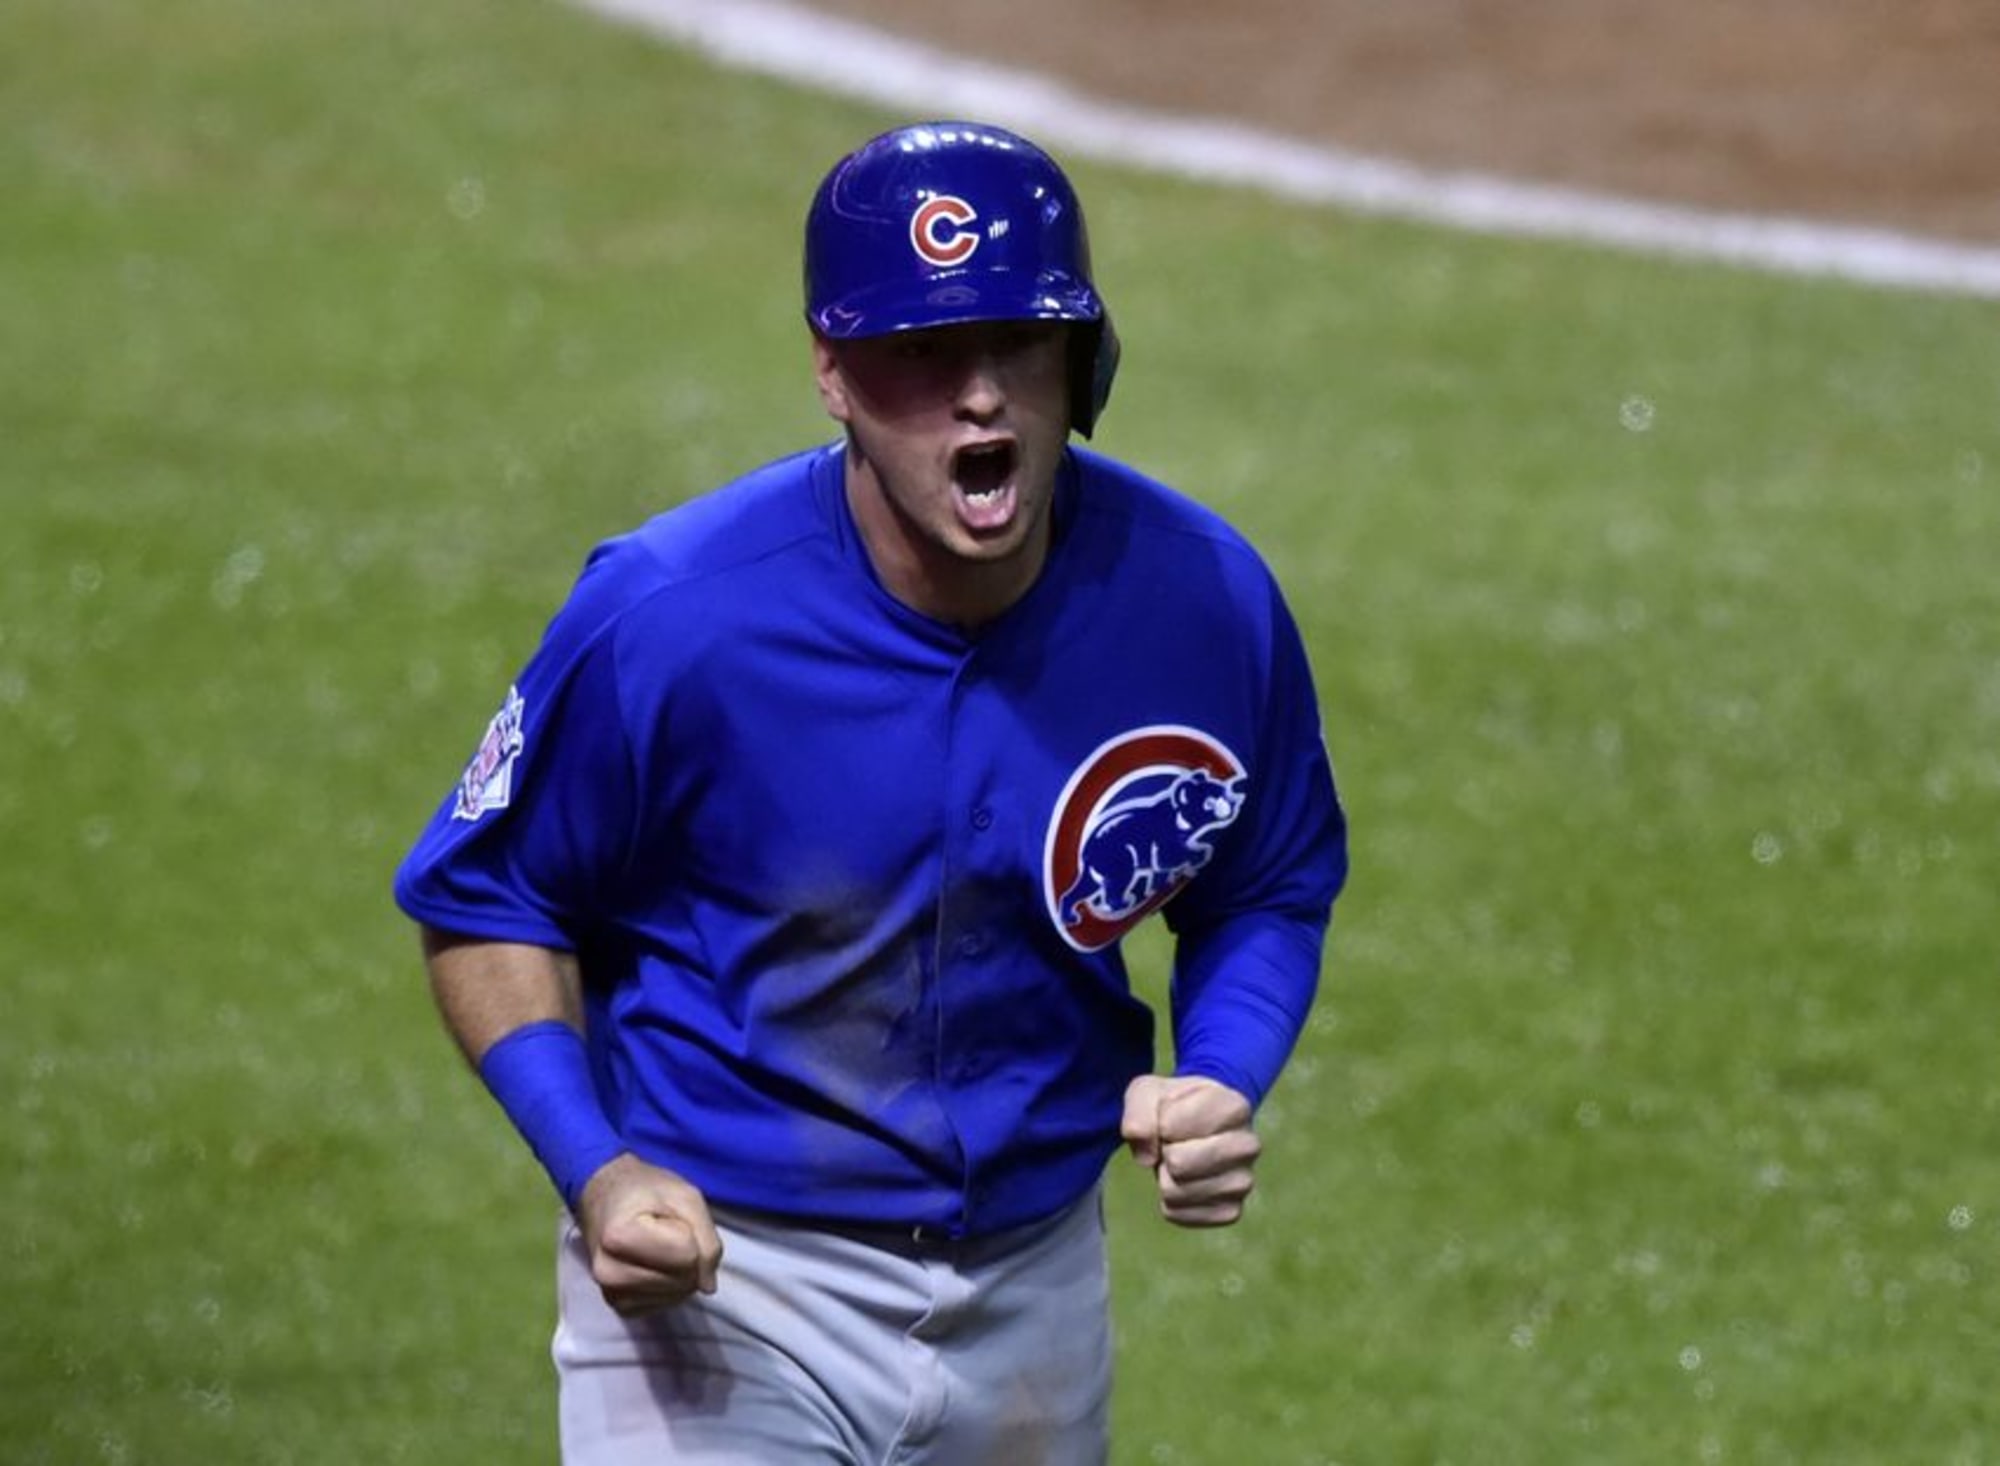 Chicago Cubs Top 10 Prospects by Baseball America